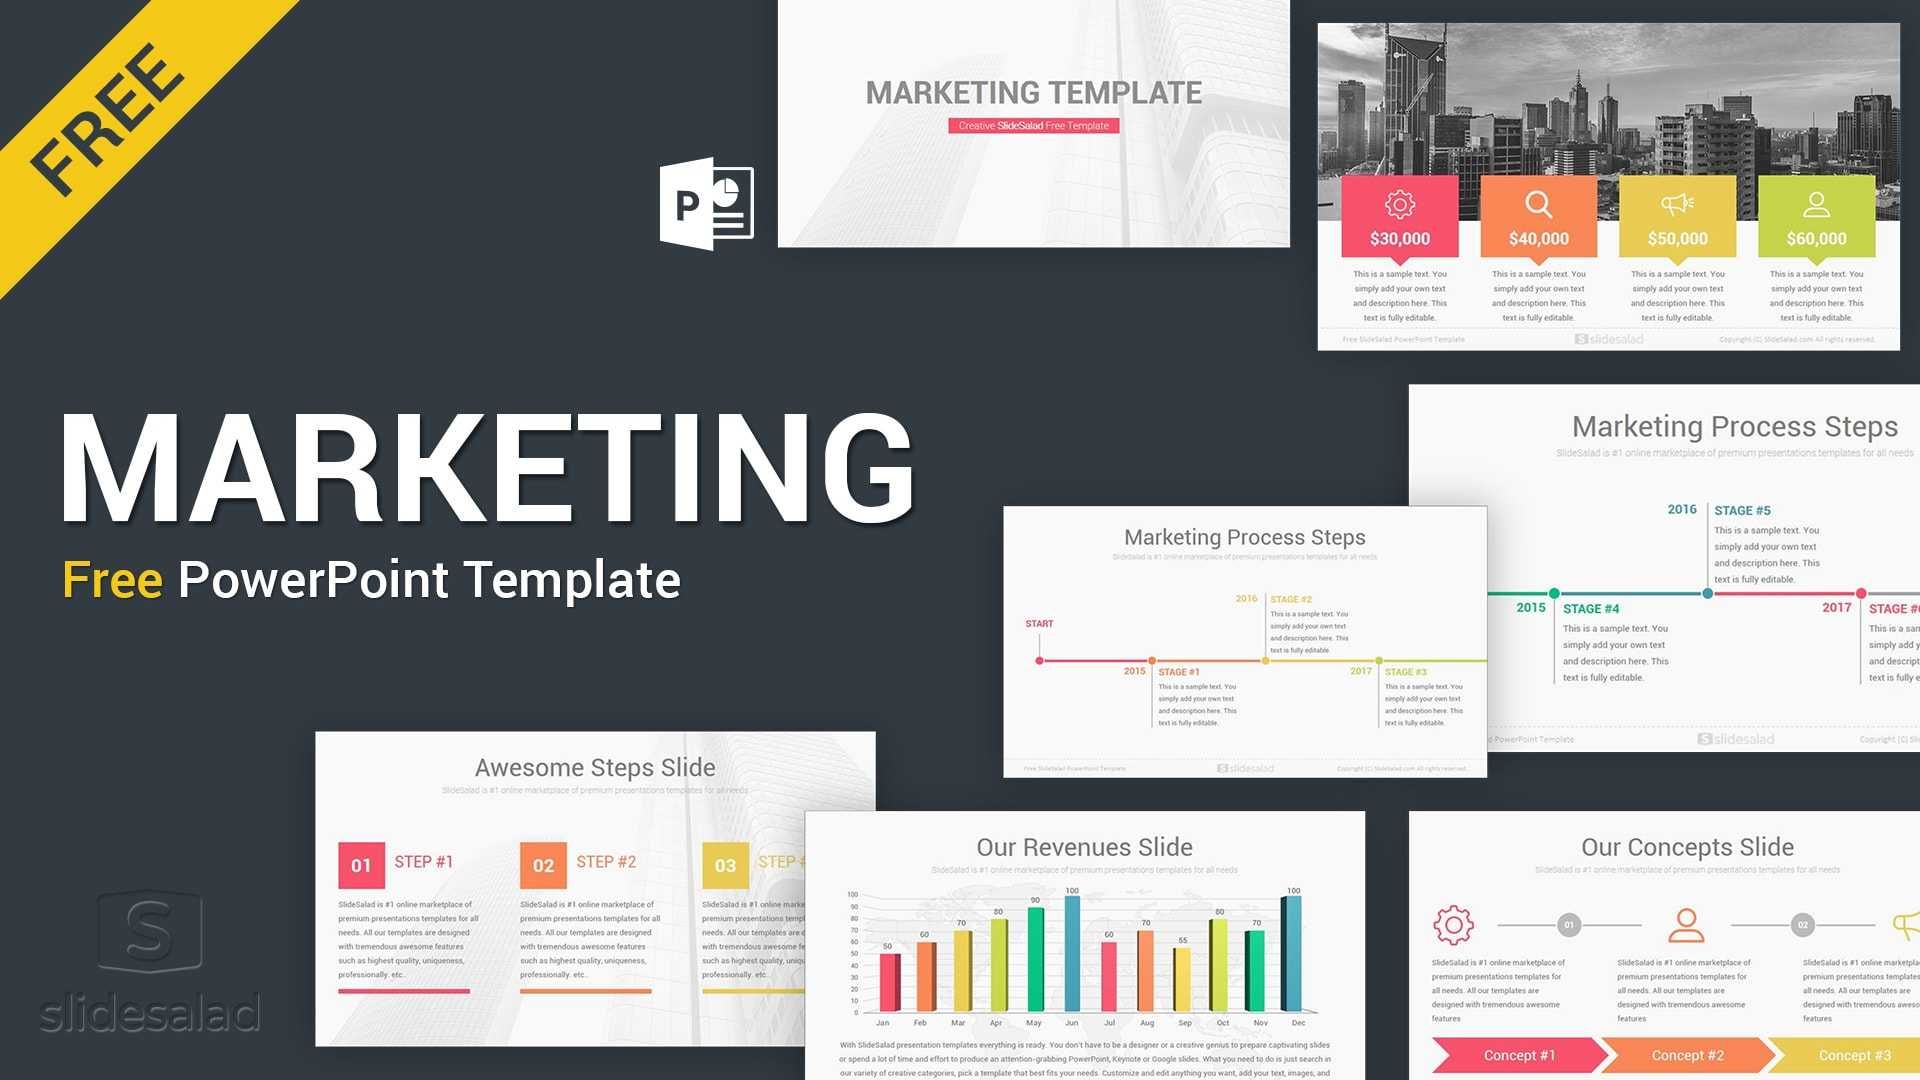 marketing-free-download-powerpoint-template-slides-slidesalad-for